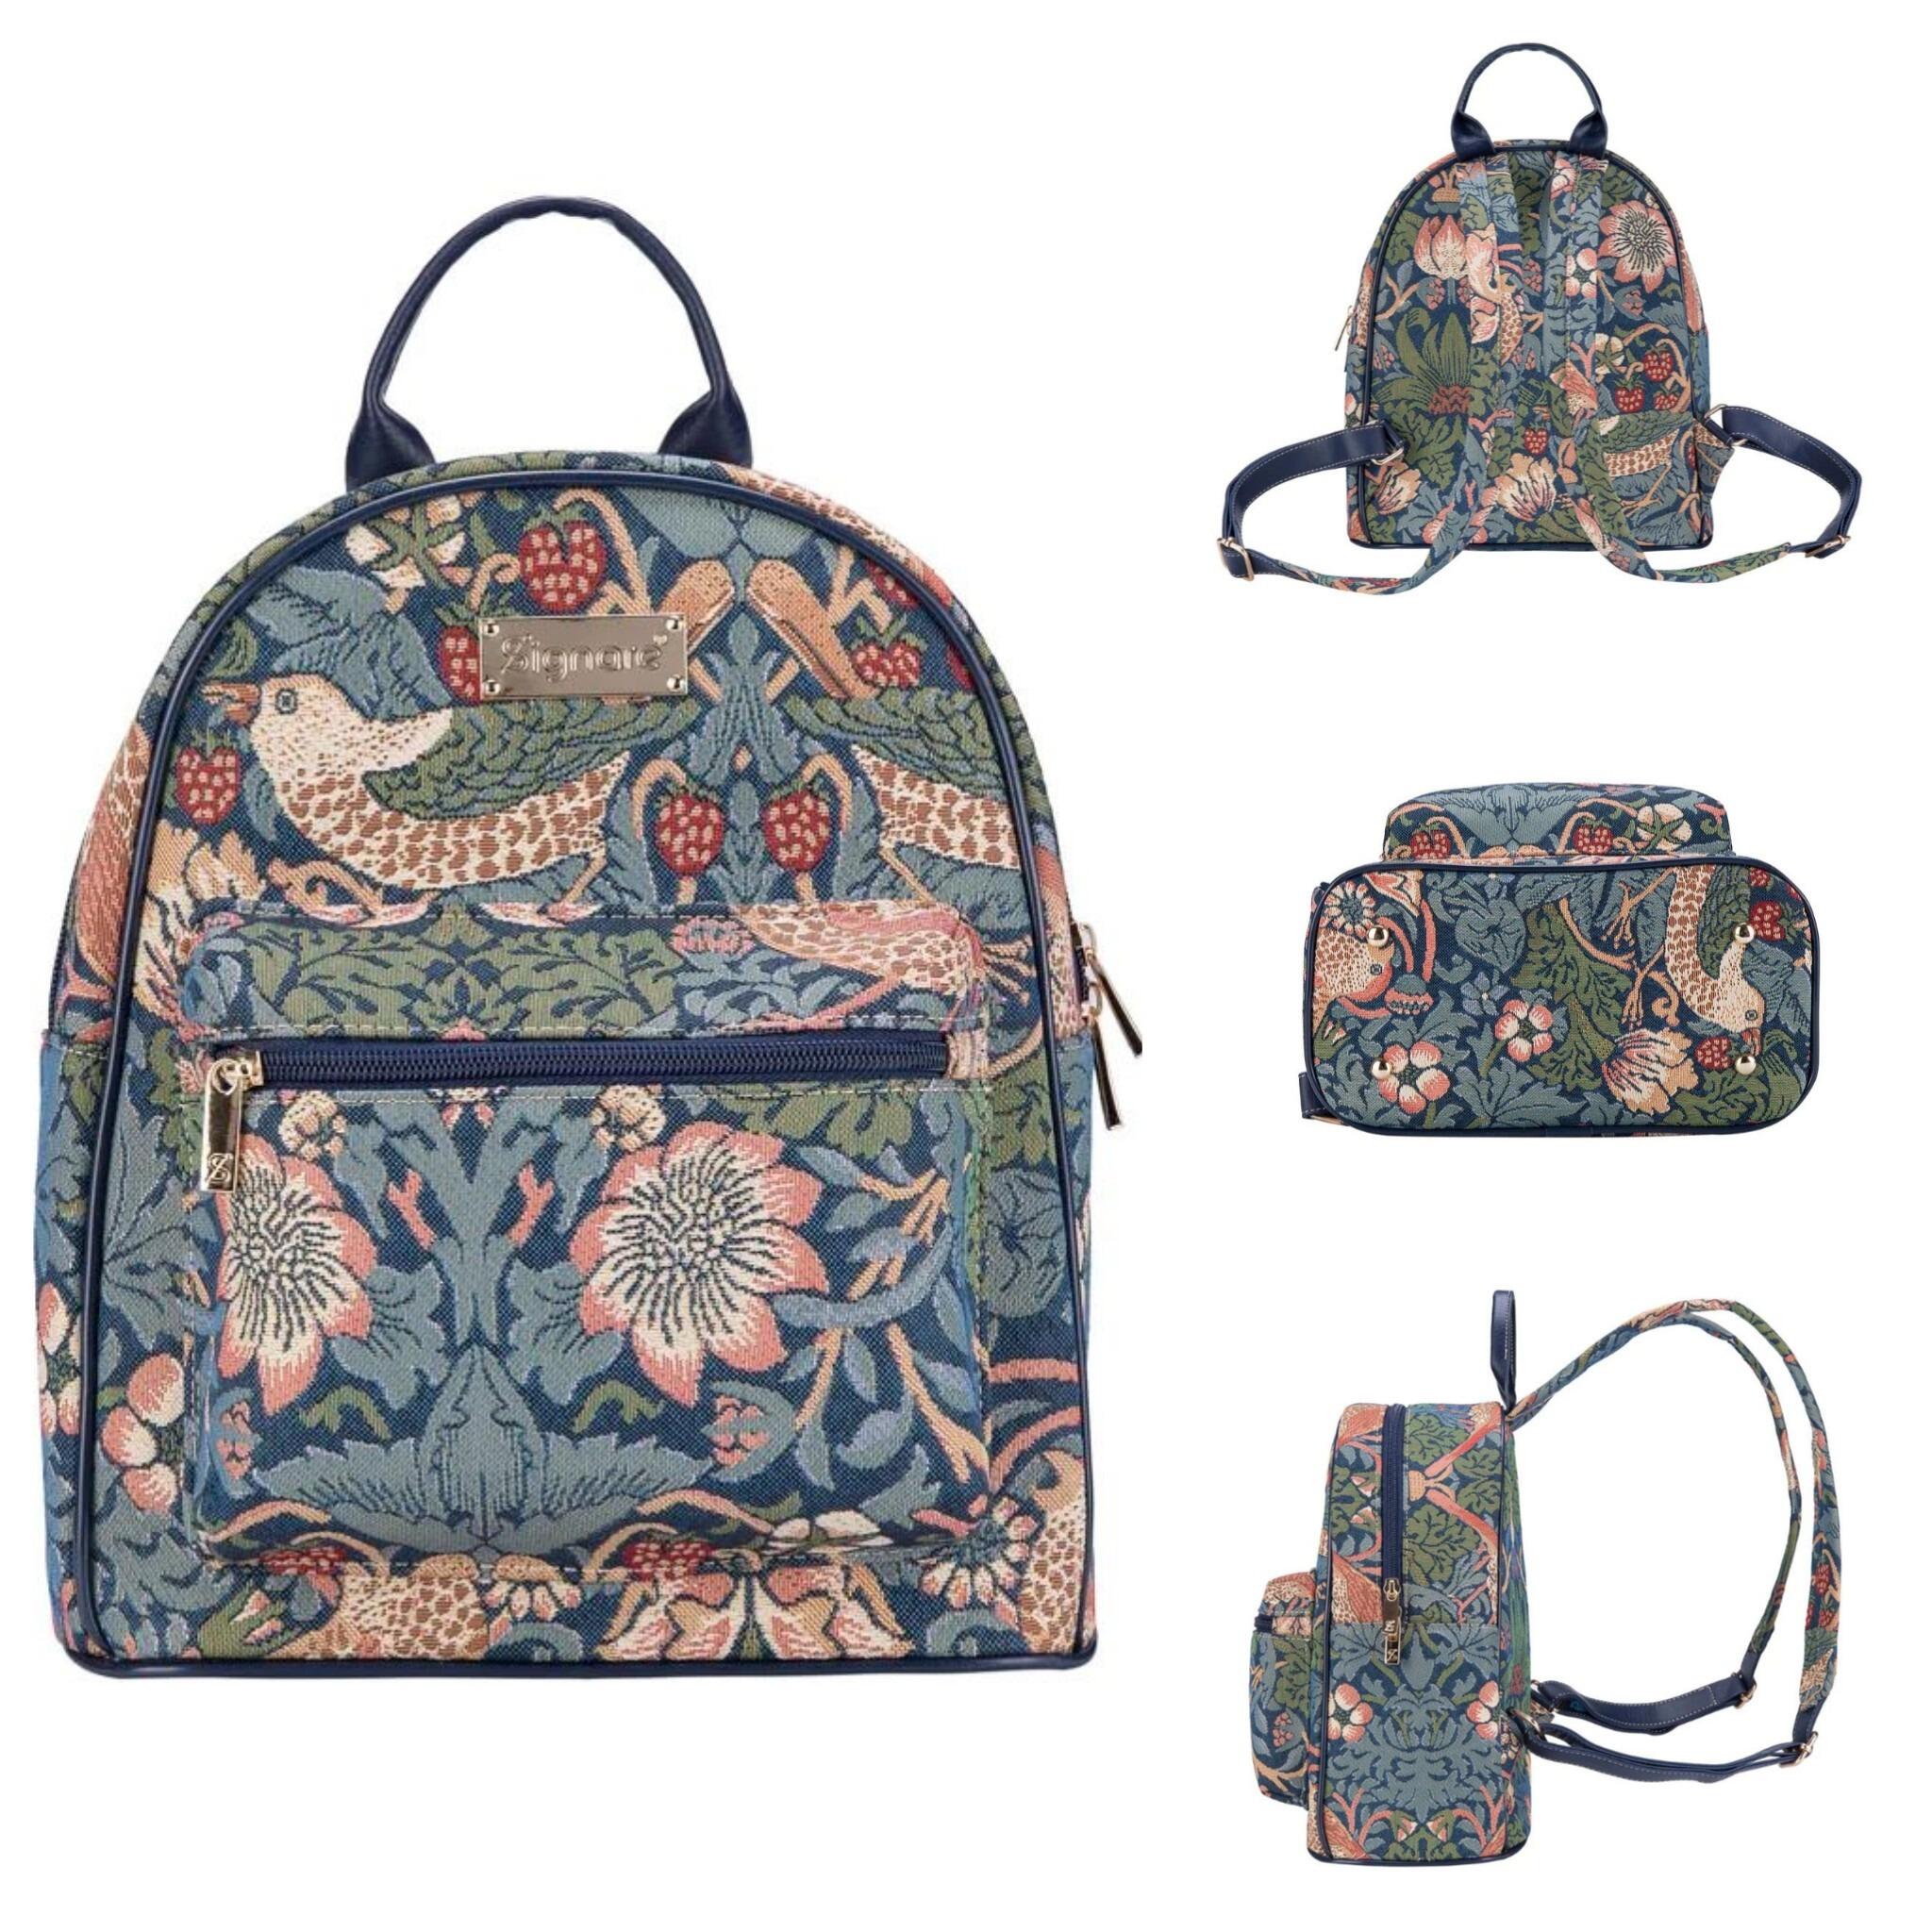 William Morris Backpack Day Bag - Strawberry Thief Blue